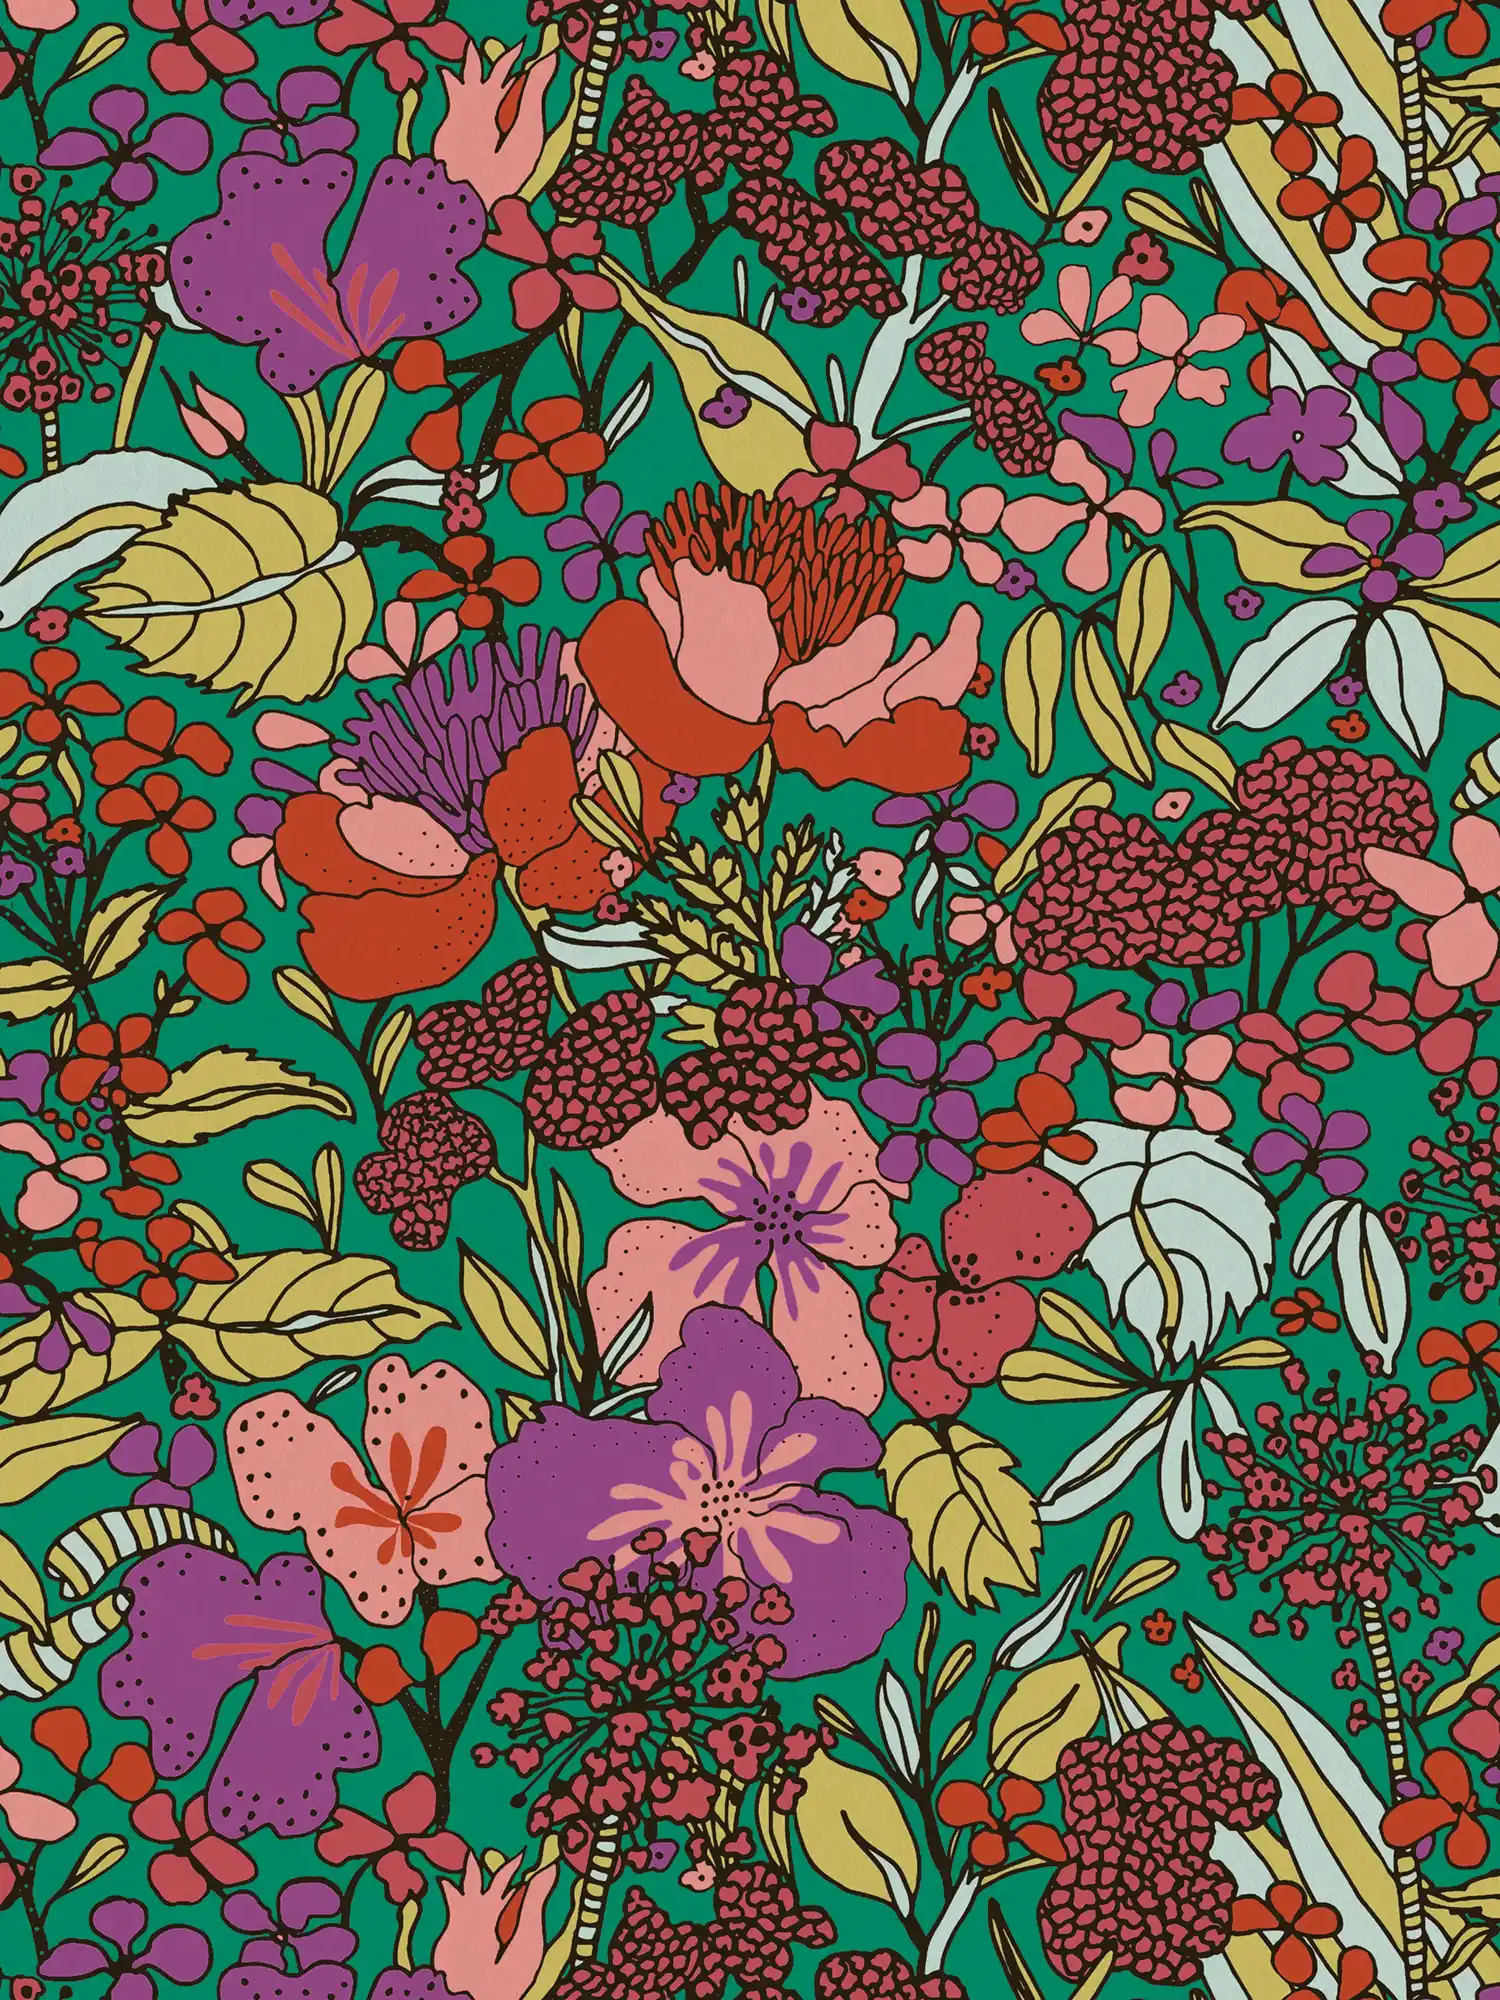 wallpaper flowers pattern colourful in colour block style - colourful, green, red
